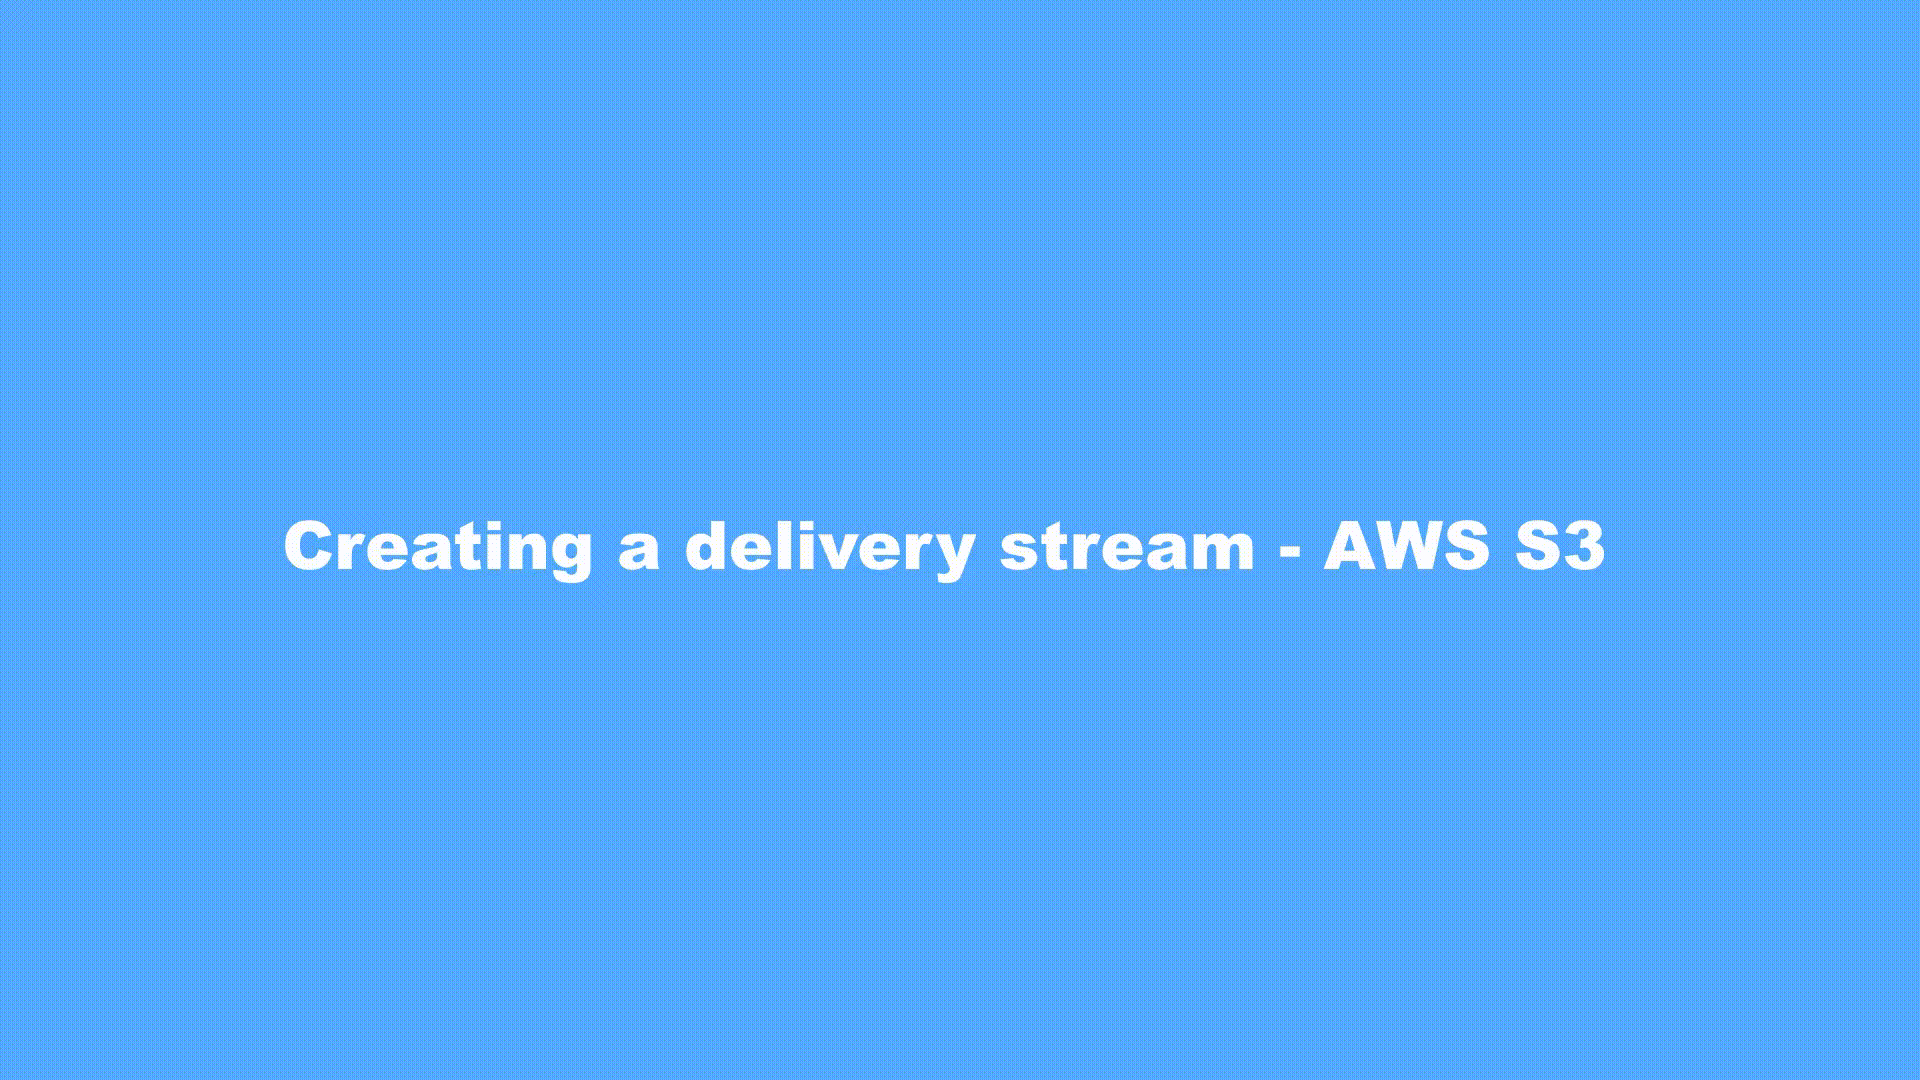 animation showing steps to create data streaming to aws